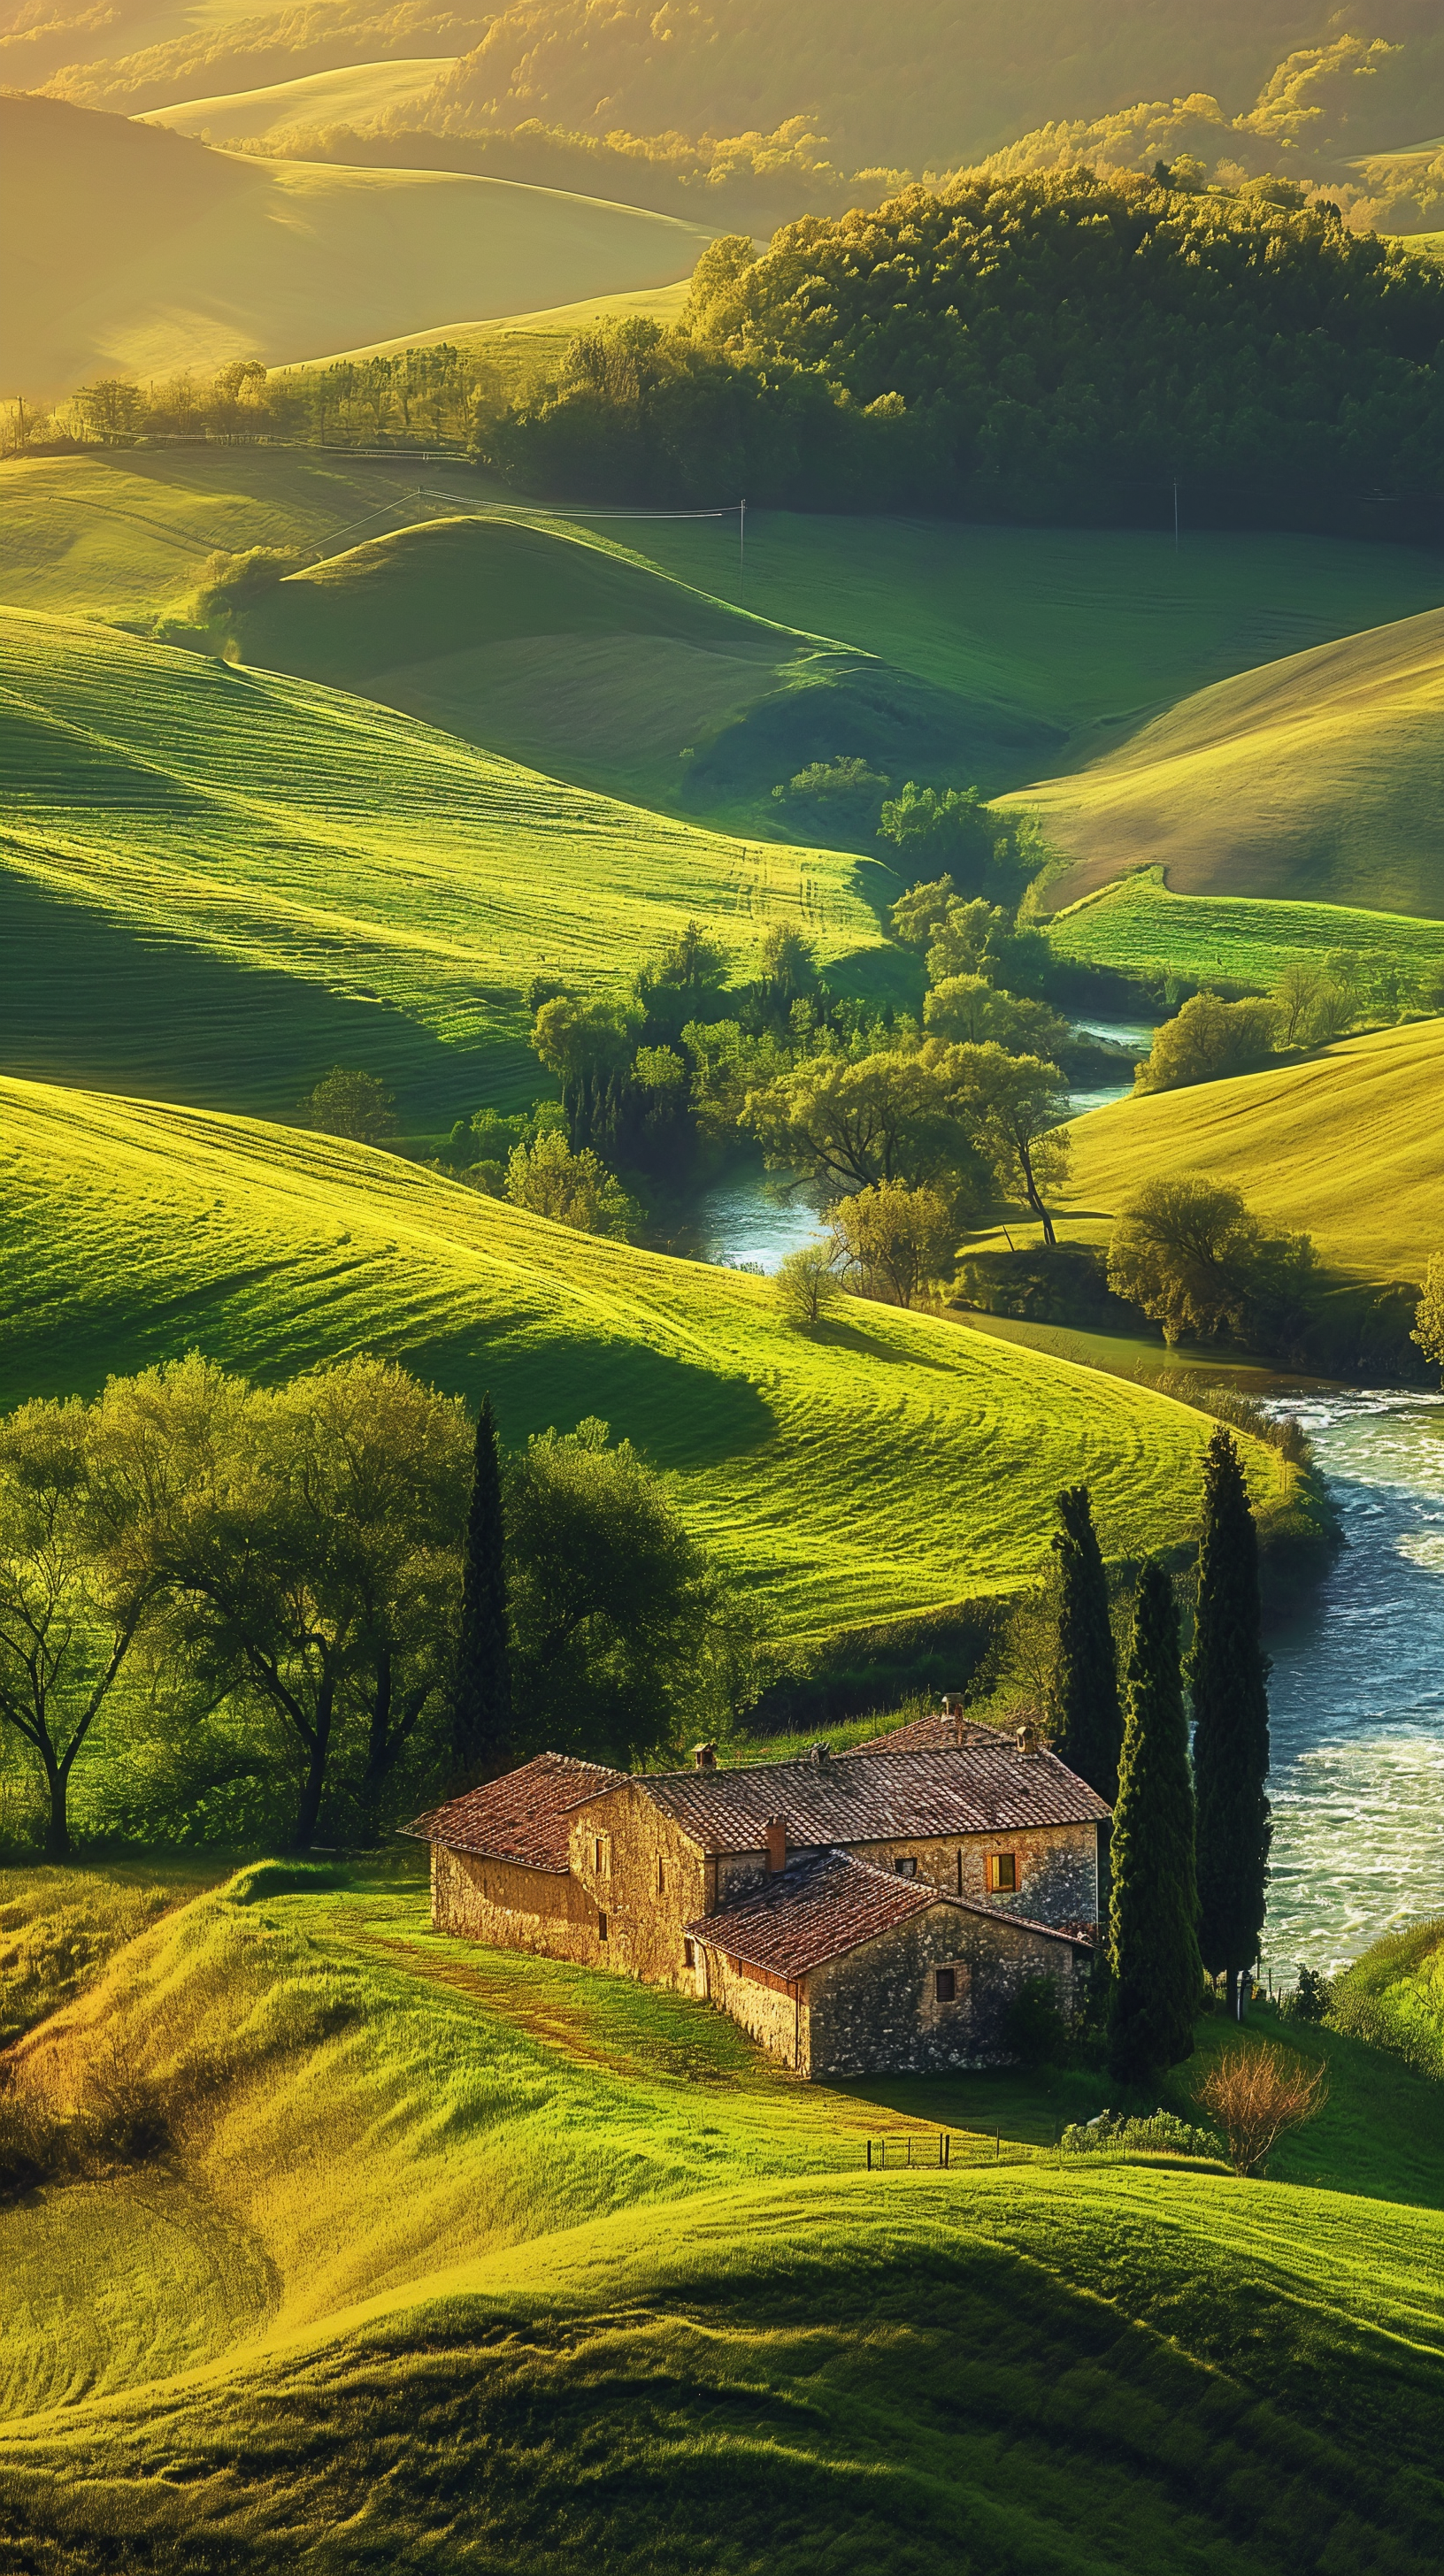 The lush rolling hills, kissed by the gentle rays of the sun